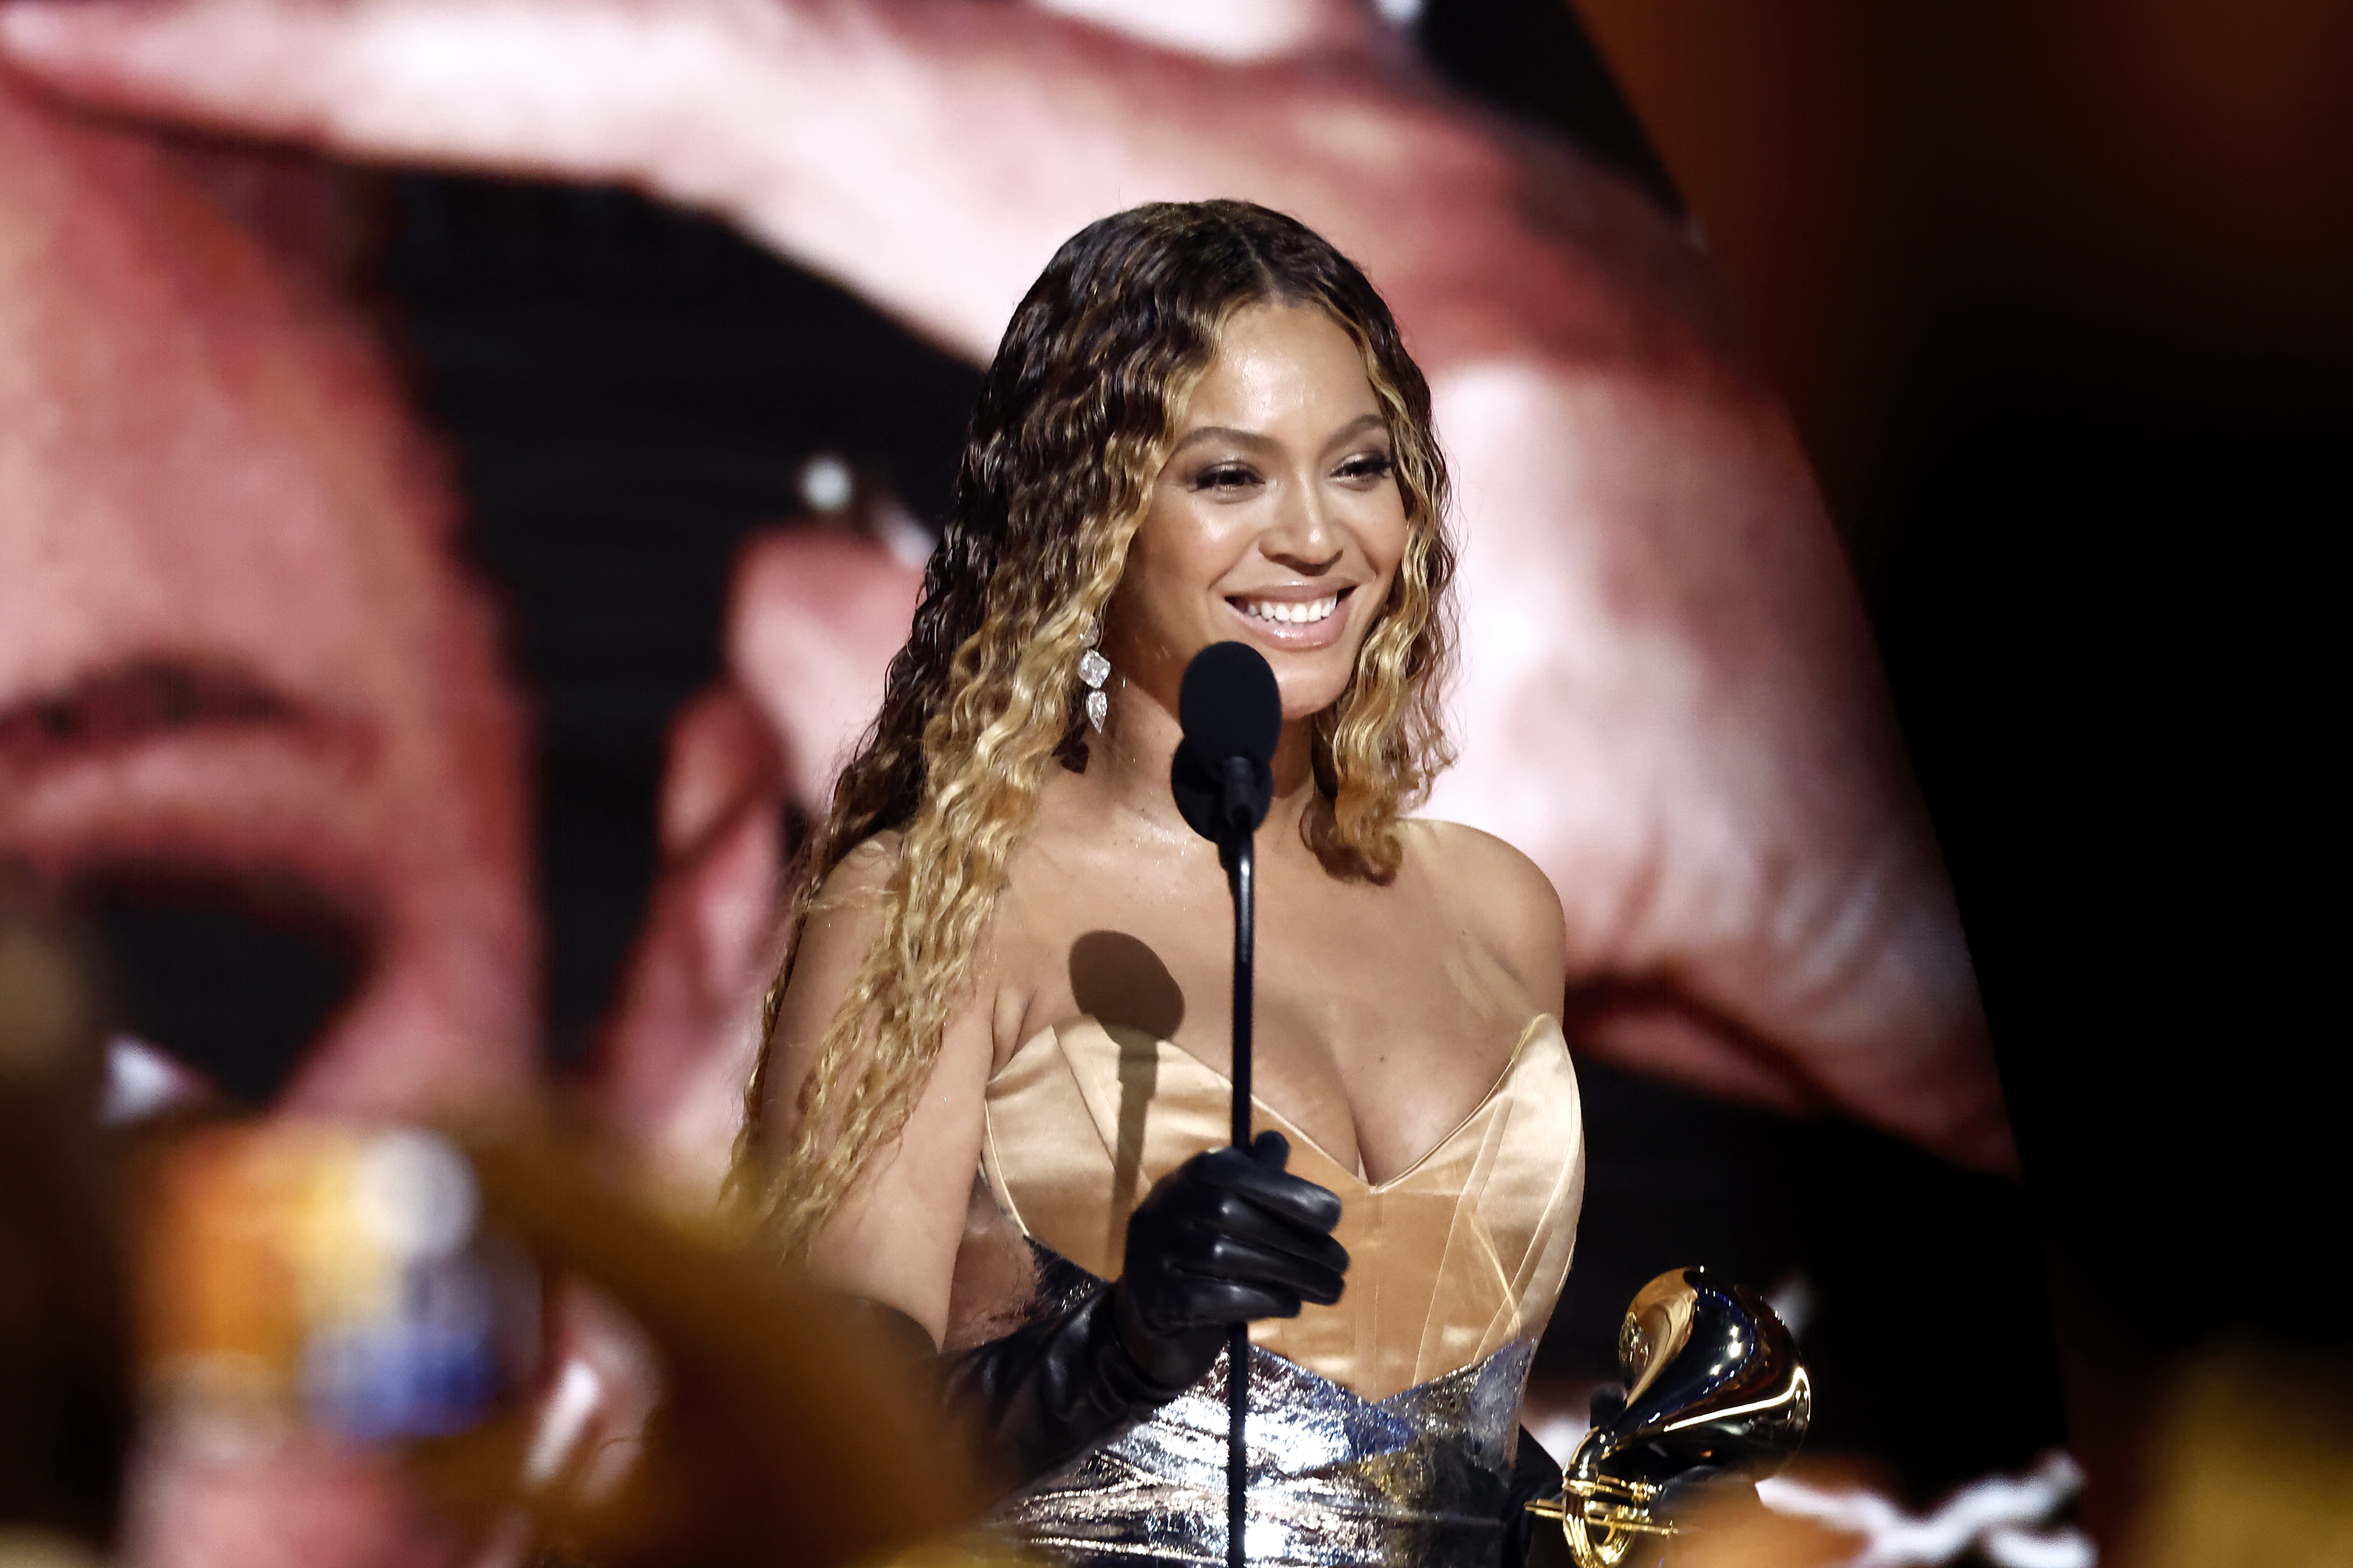 LOS ANGELES, CALIFORNIA - FEBRUARY 05: Beyoncé accepts Best Dance/Electronic Music Album for “Renaissance” onstage during the 65th GRAMMY Awards at Crypto.com Arena on February 05, 2023 in Los Angeles, California. (Photo by Emma McIntyre/Getty Images for The Recording Academy)